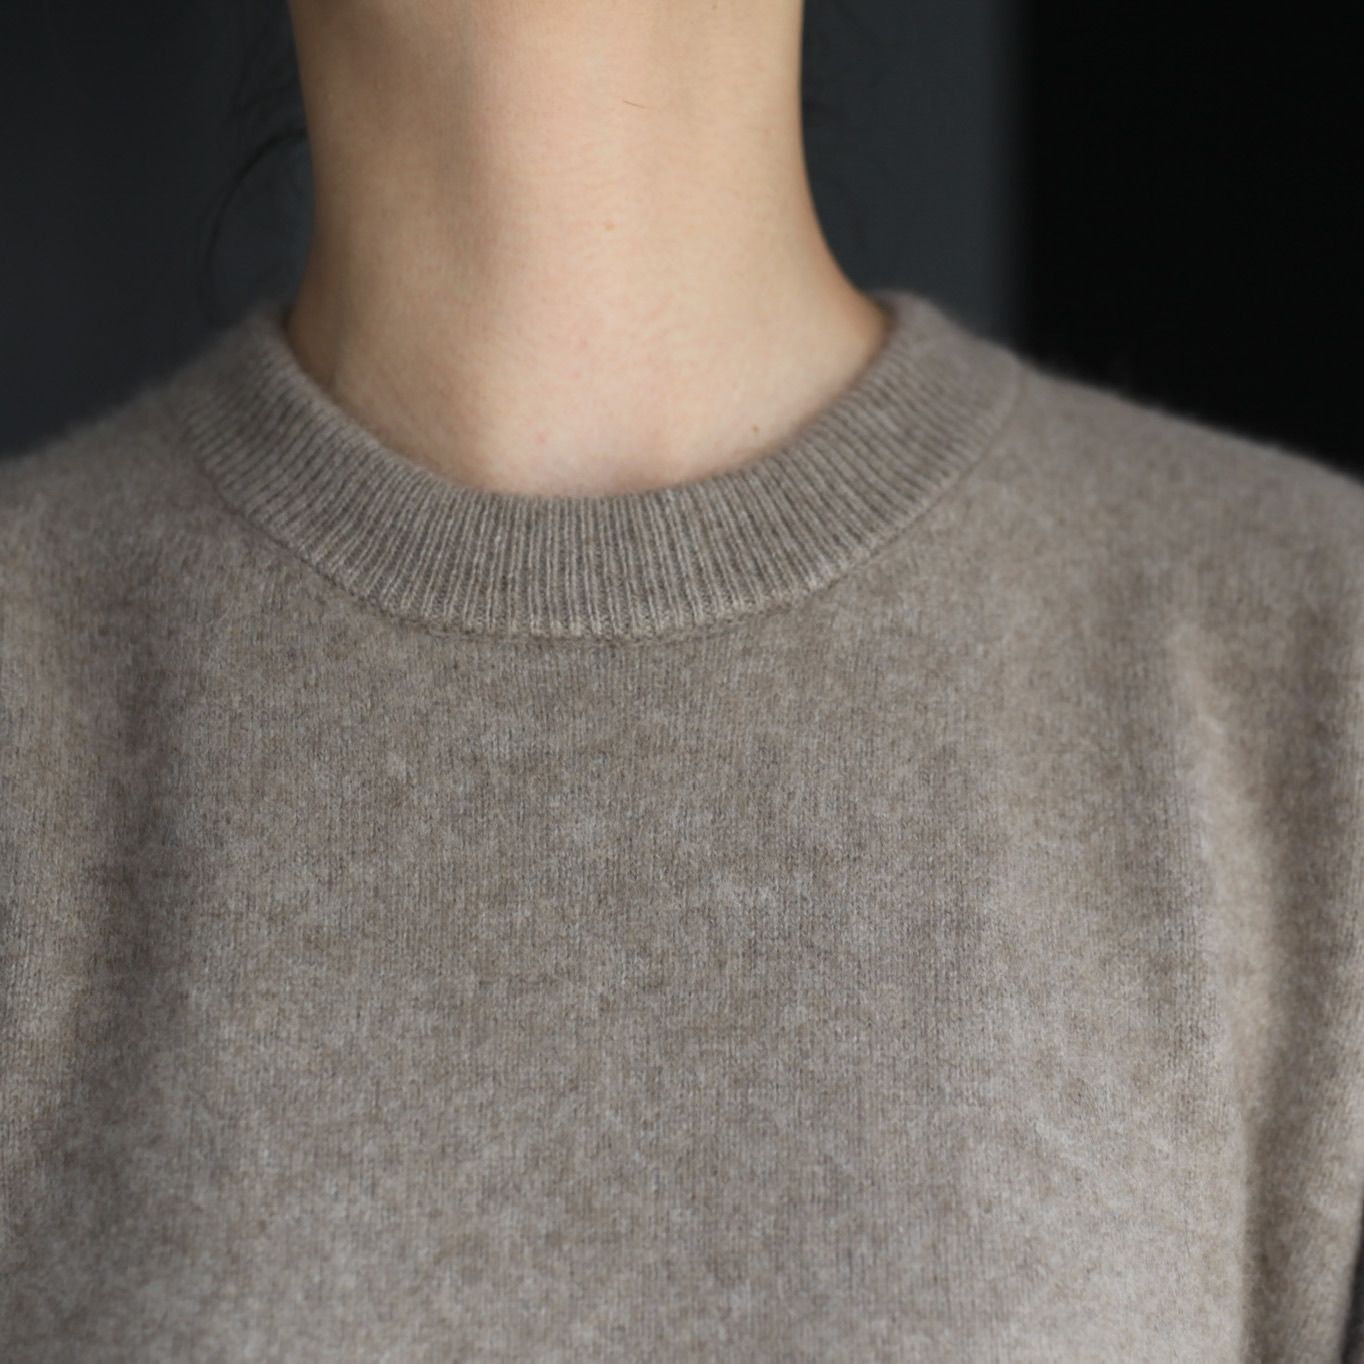 stein - 【残りわずか】Extra Fine Cashmere Sable Knit LS | ACRMTSM ...